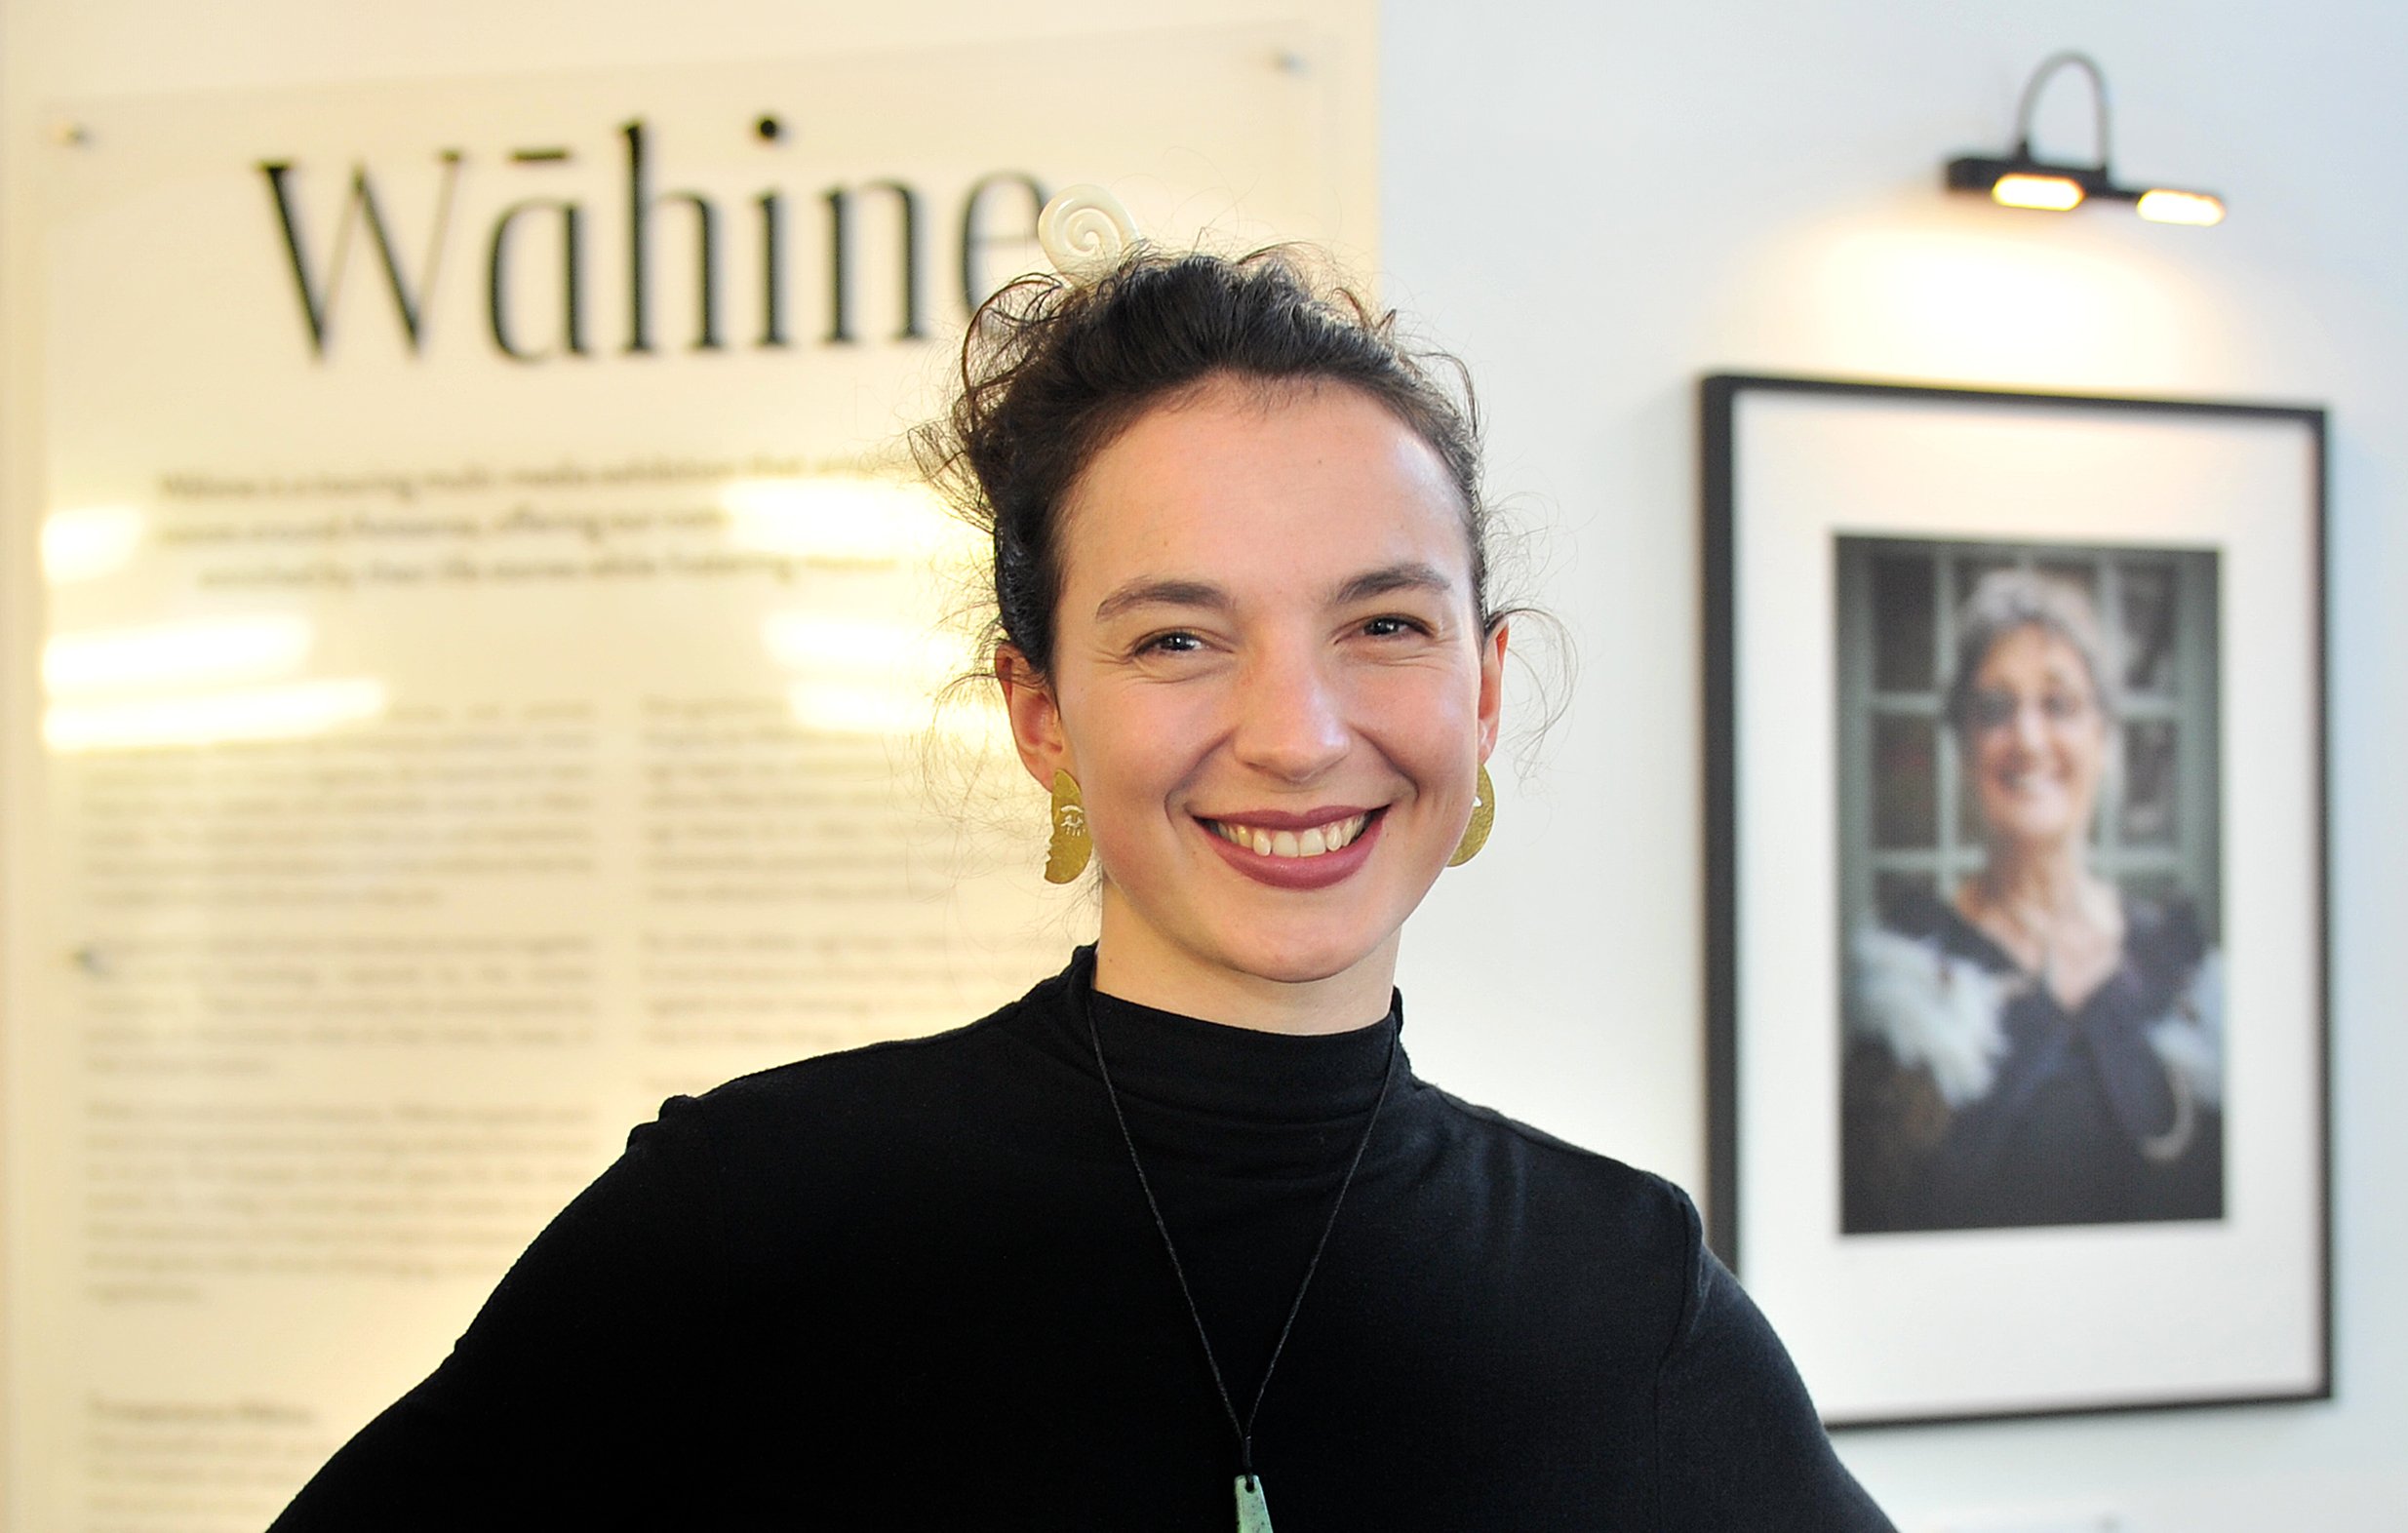 ‘‘Wahine’’, the latest exhibition by French artist Loren Pasquier (pictured), is now open at...